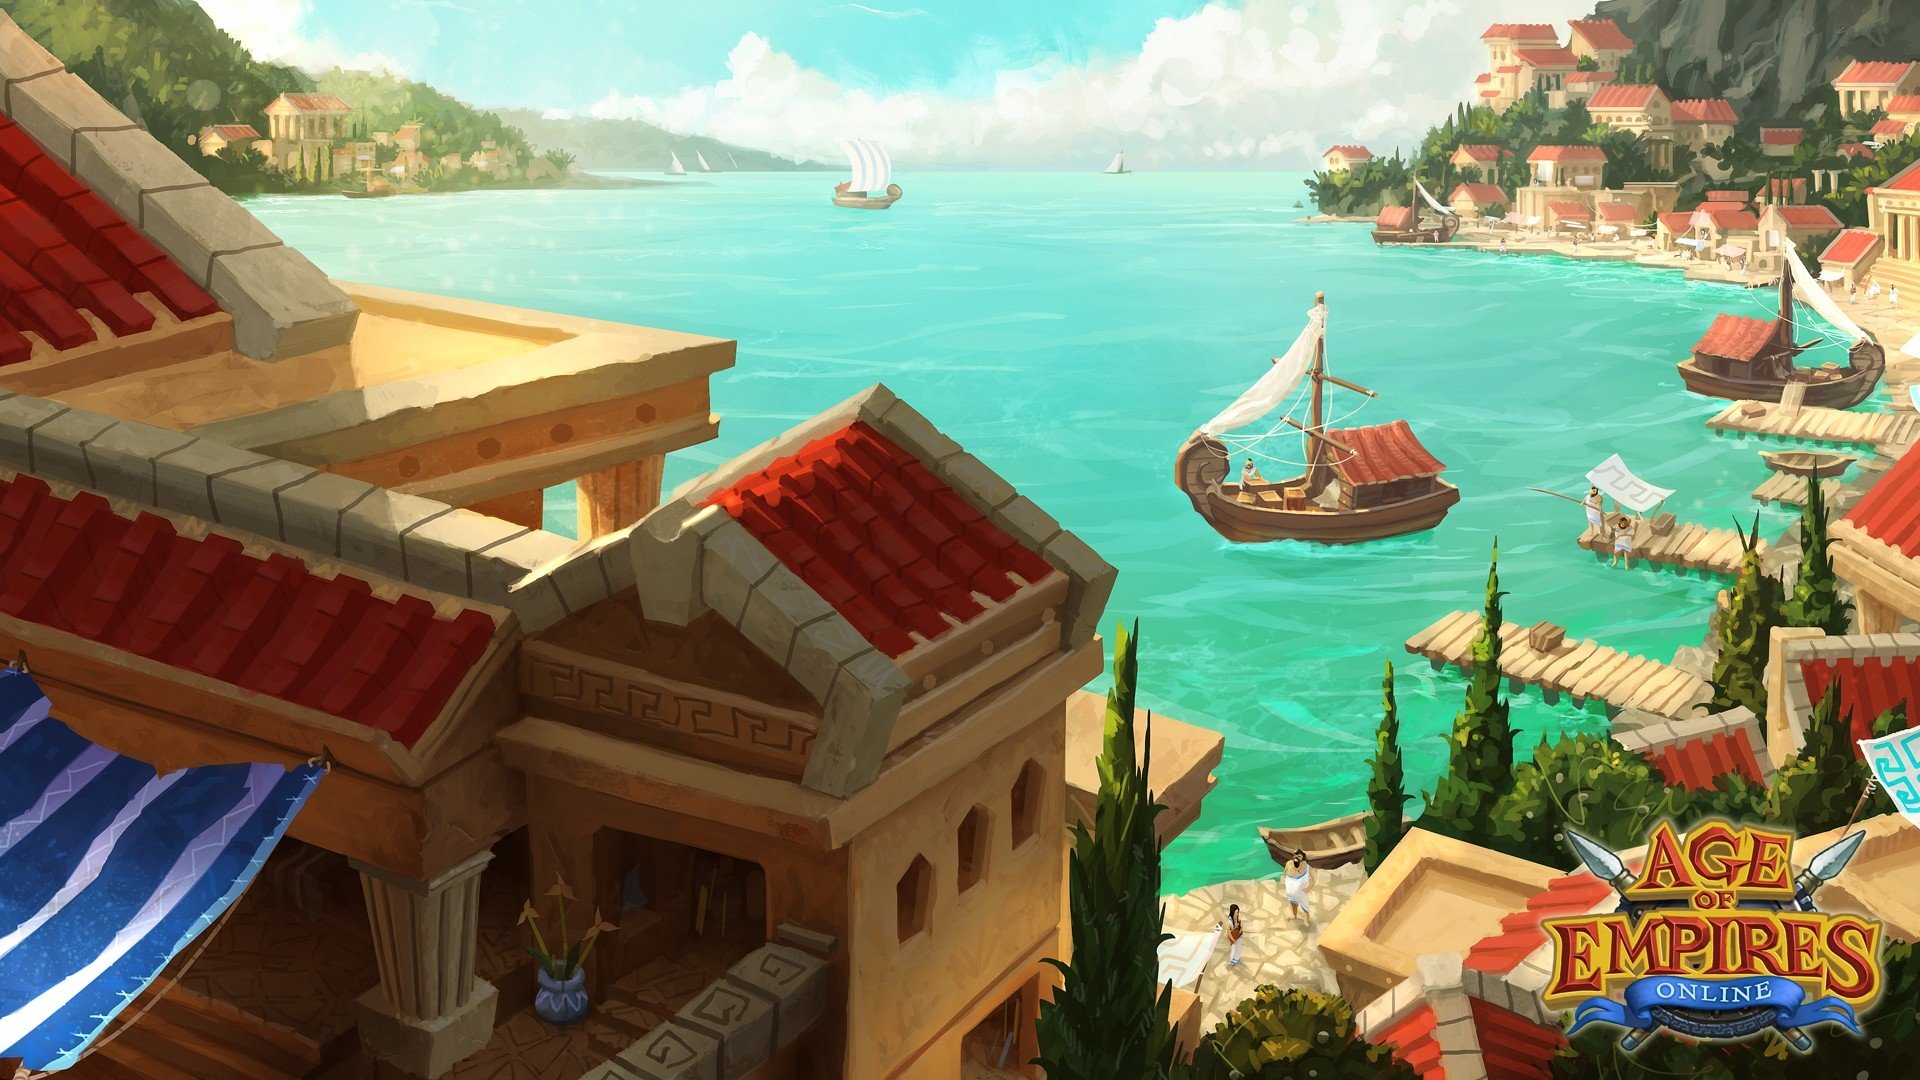 age of empires 2 hd screen resolution